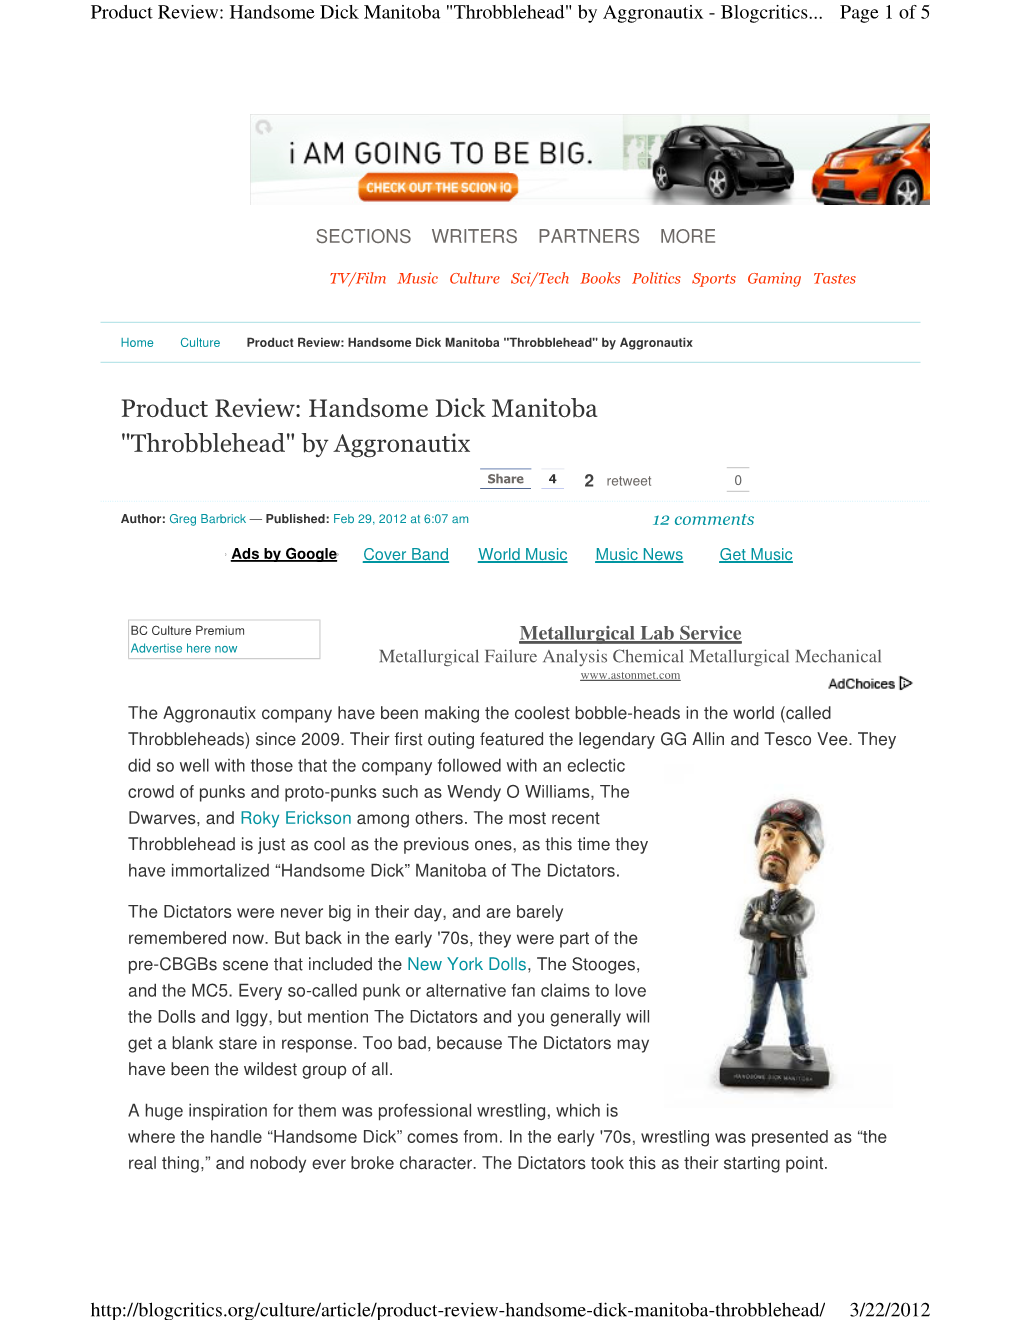 Product Review: Handsome Dick Manitoba "Throbblehead" by Aggronautix - Blogcritics